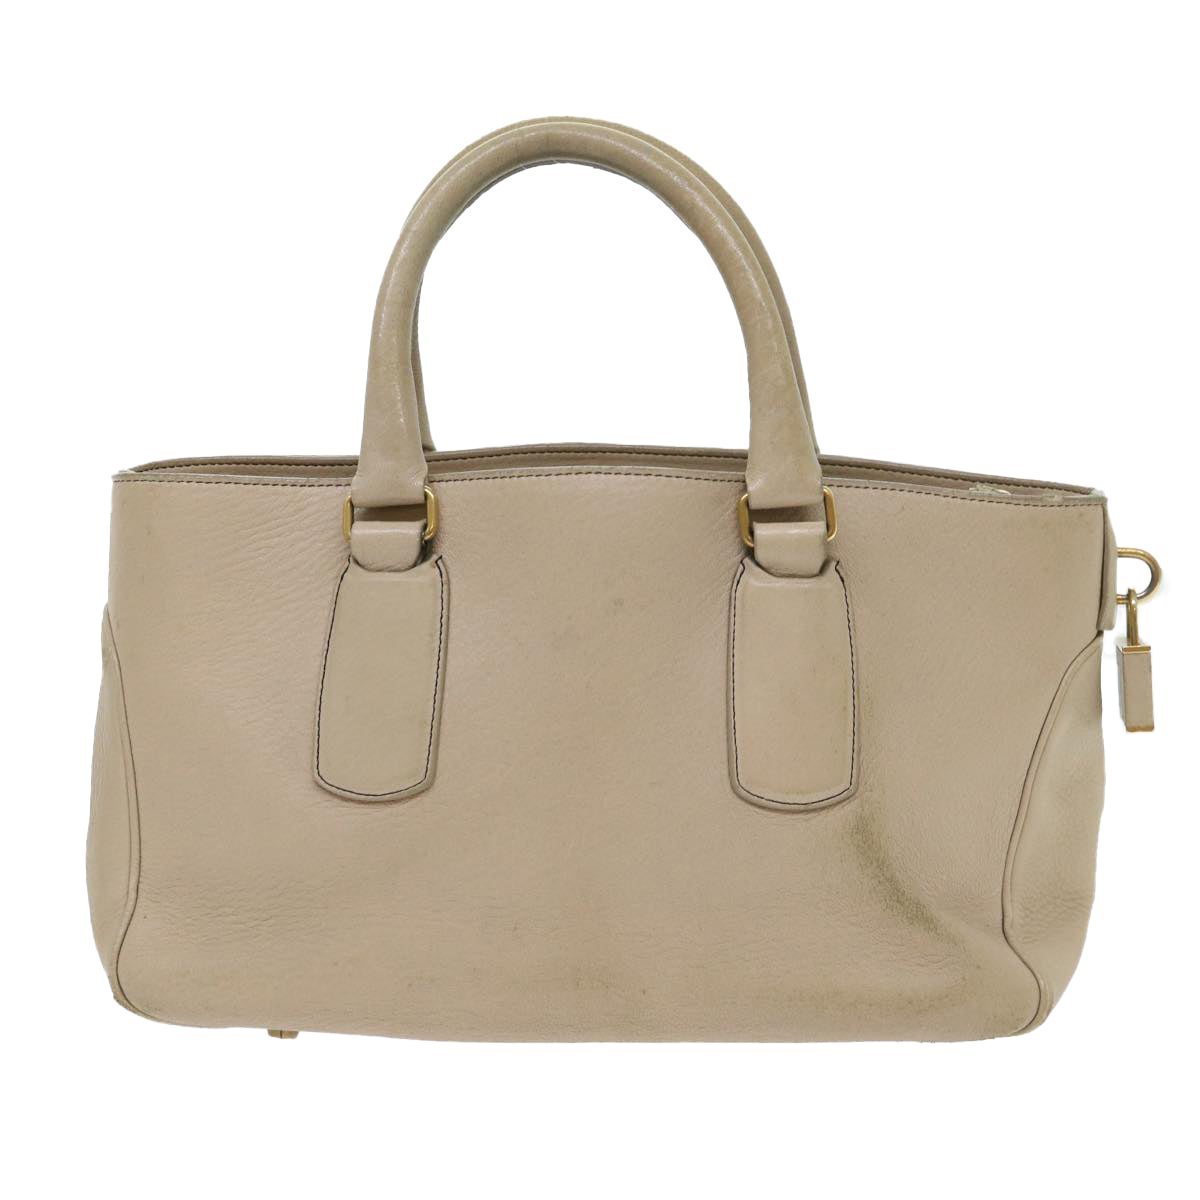 CELINE Hand Bag Leather Beige Auth bs8421 - 0